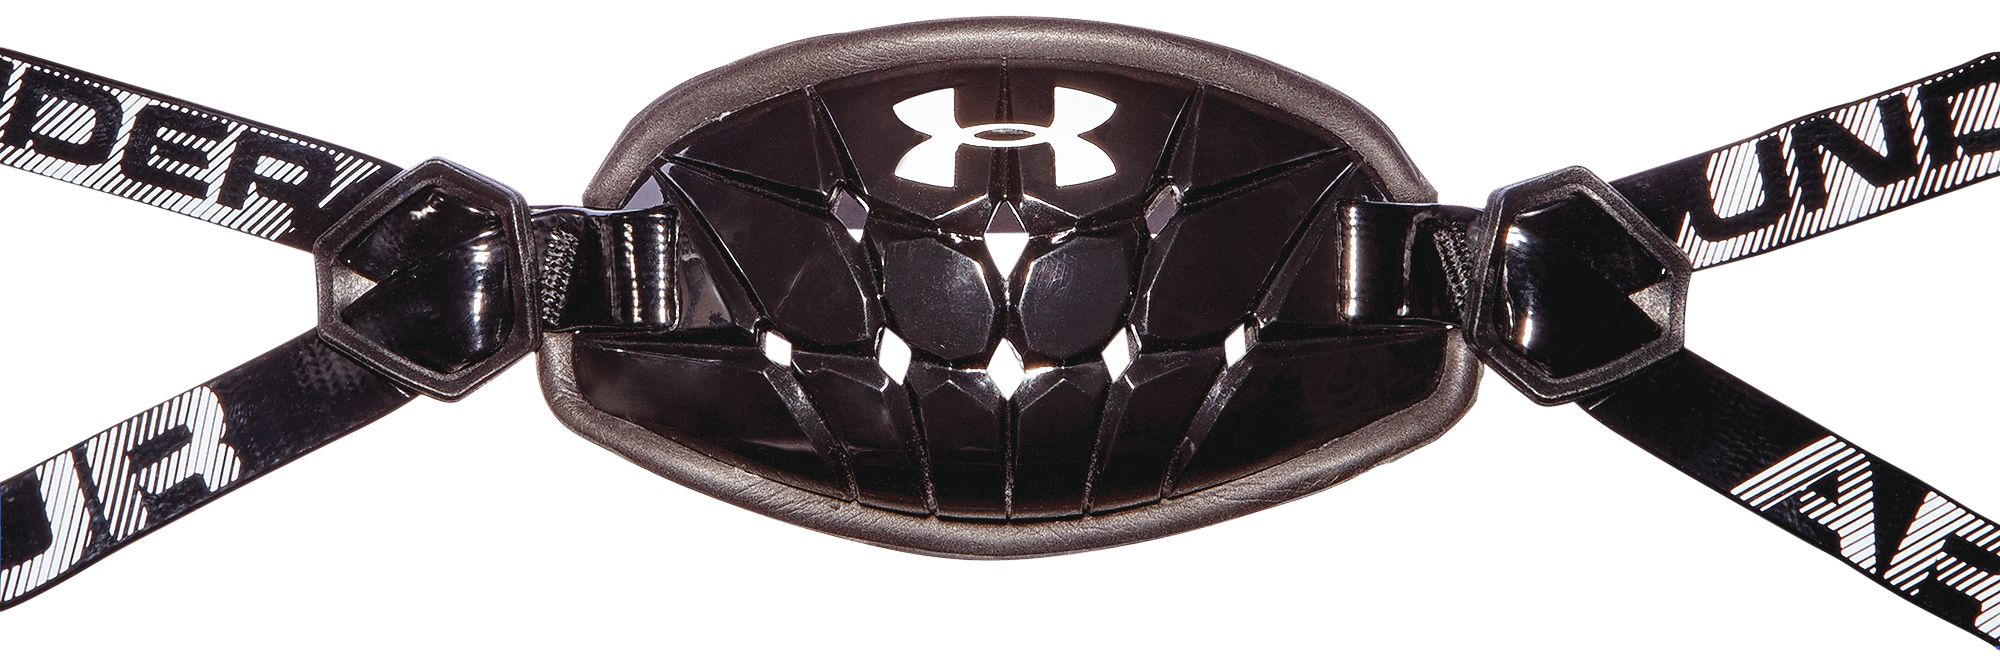 under armour youth chin strap